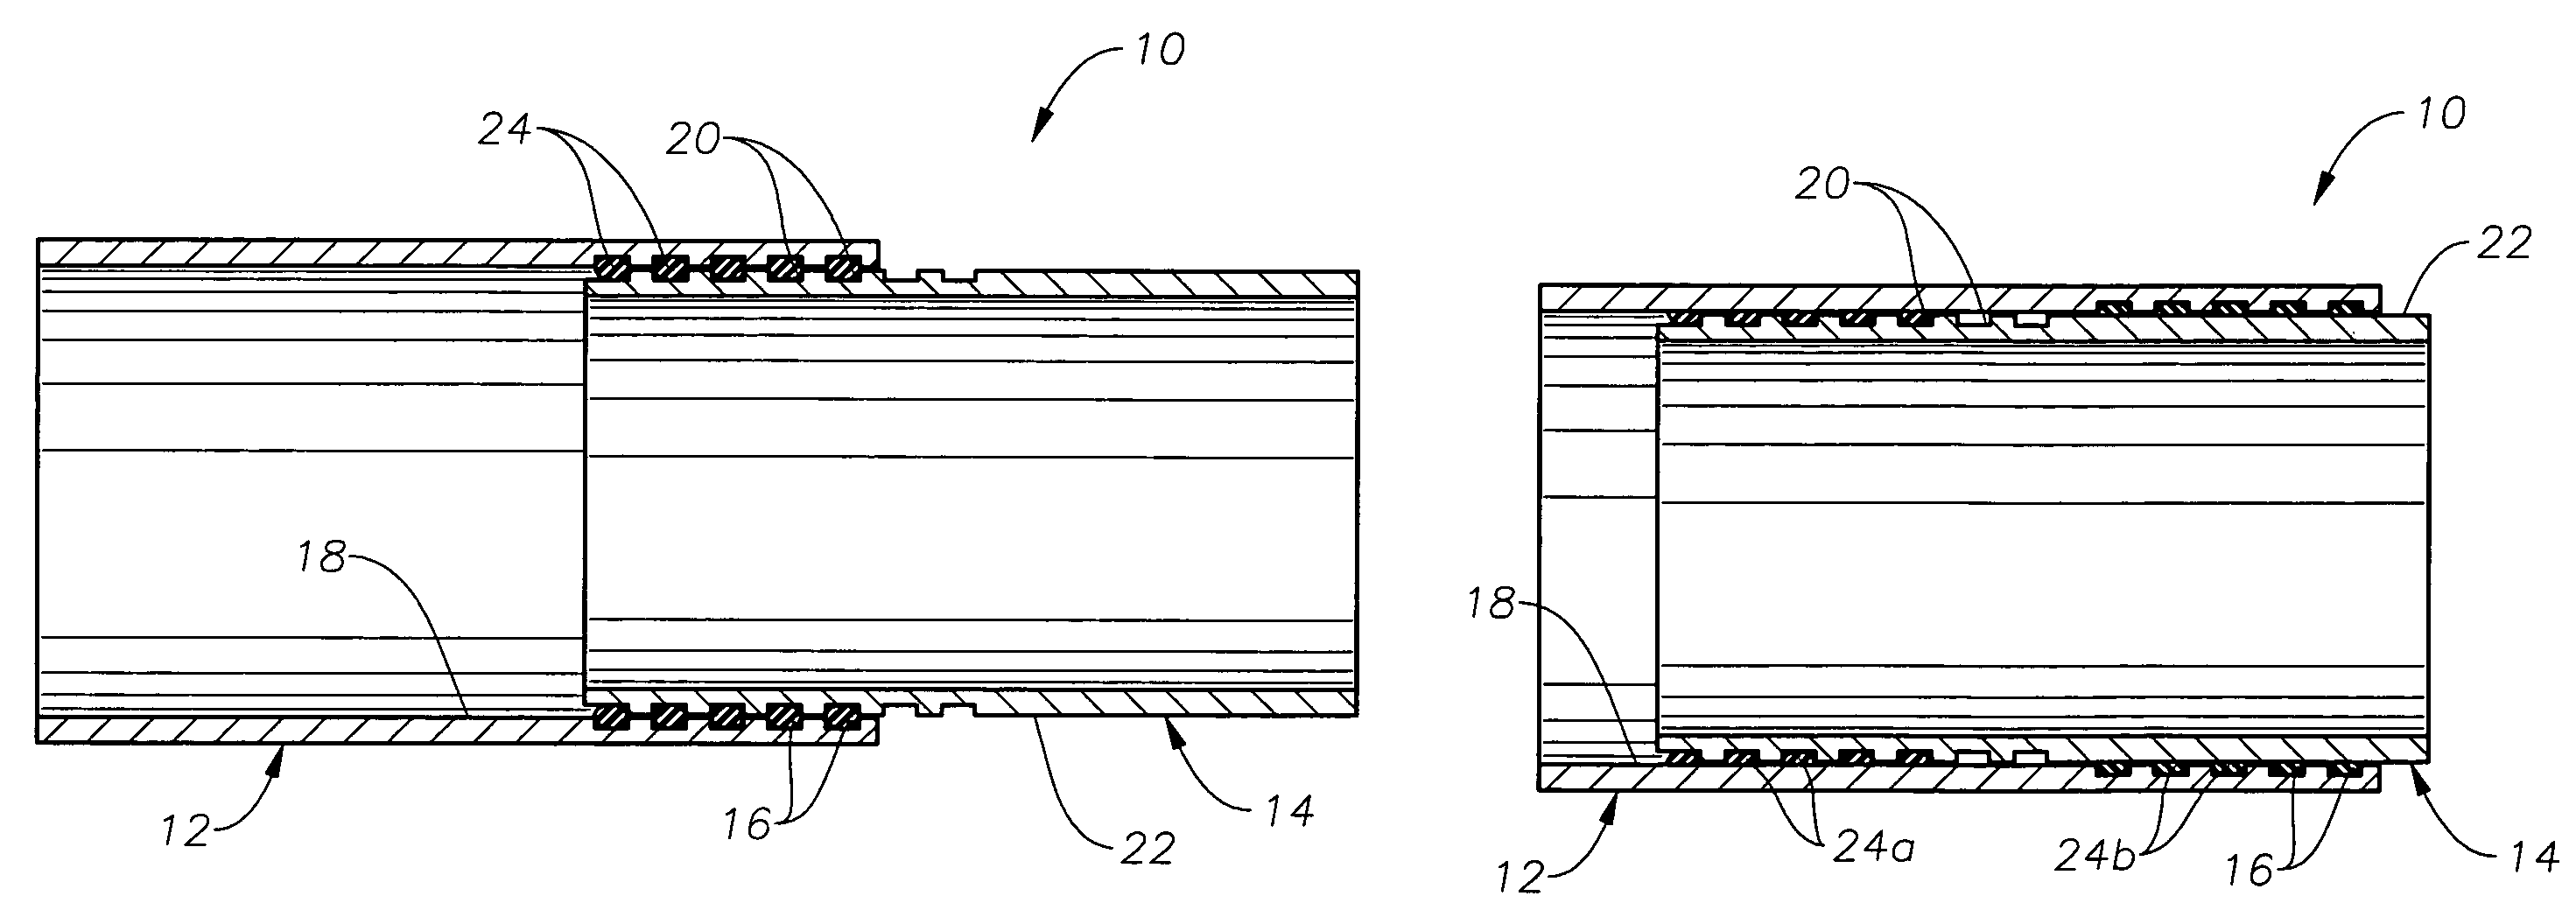 Sliding sleeve devices and methods using O-ring seals as shear members